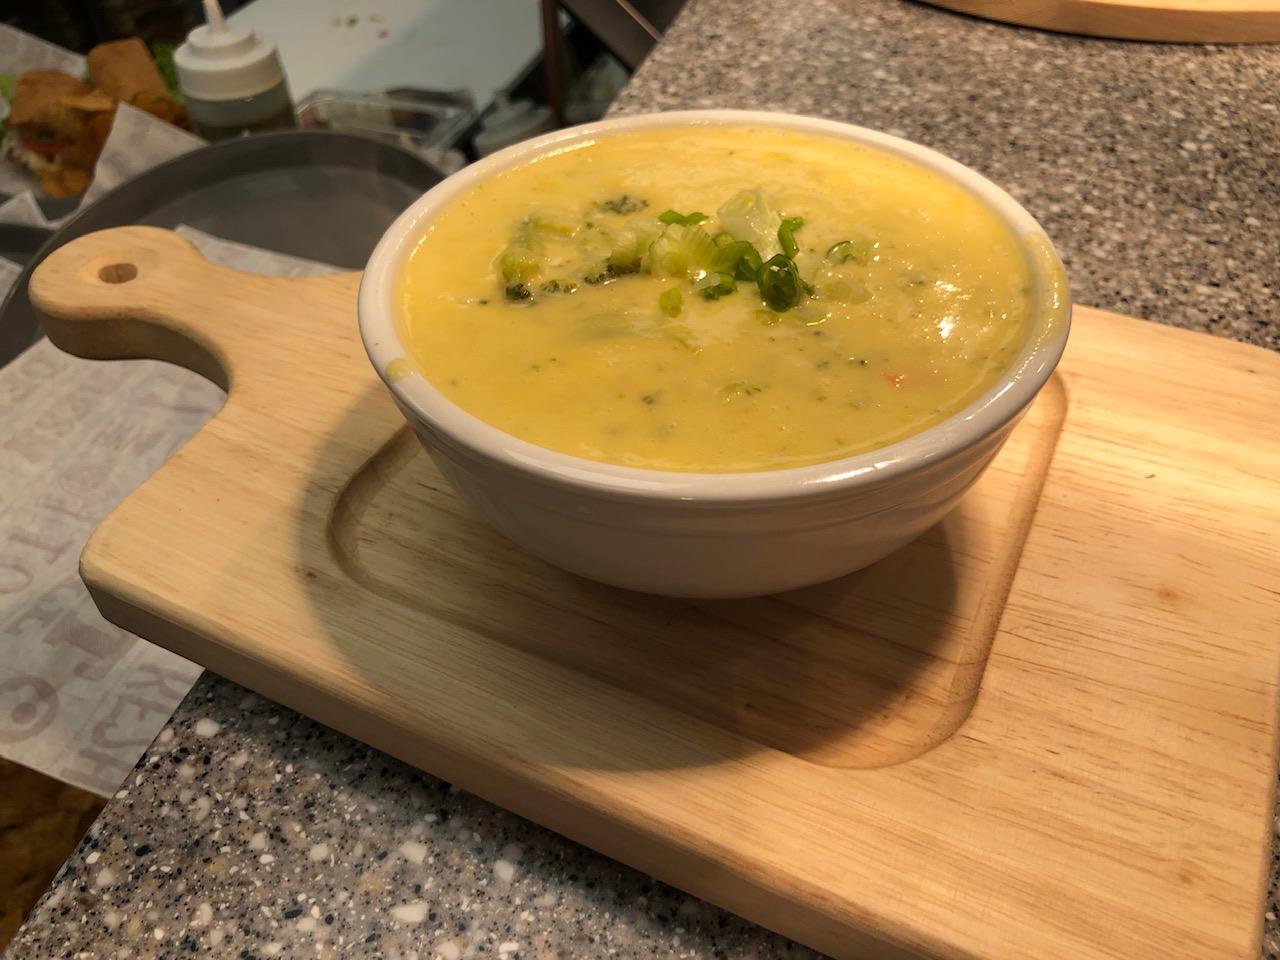 Broccoli cheddar soup from The Common Man Millyard in Manchester, NH.